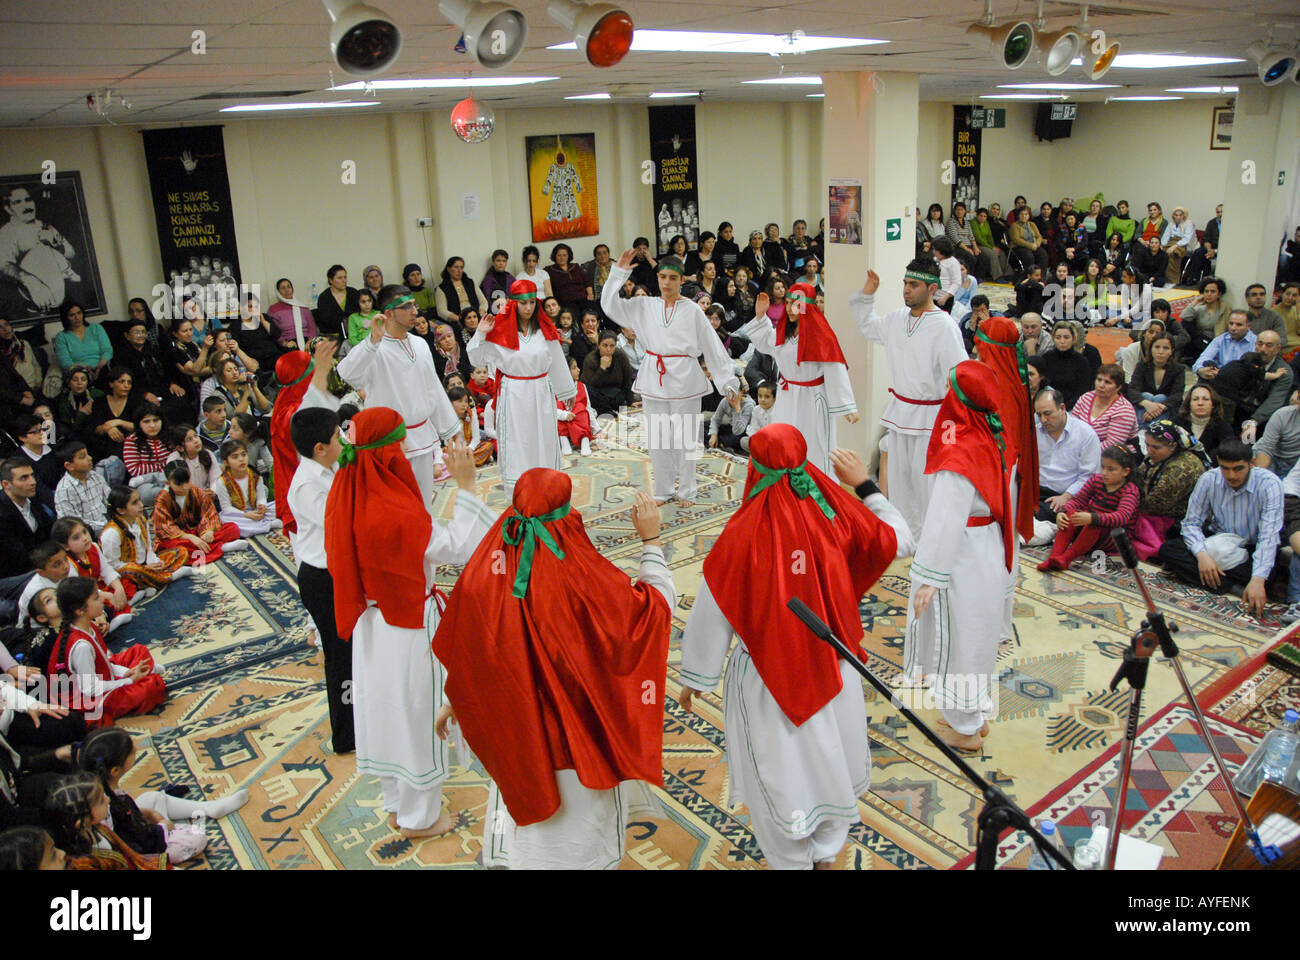 ETHNIC ALEVIS  IN ALEVIS  CULTURAL CENTER DURING SEMAH CEREMONY IN NORTH LONDON Stock Photo